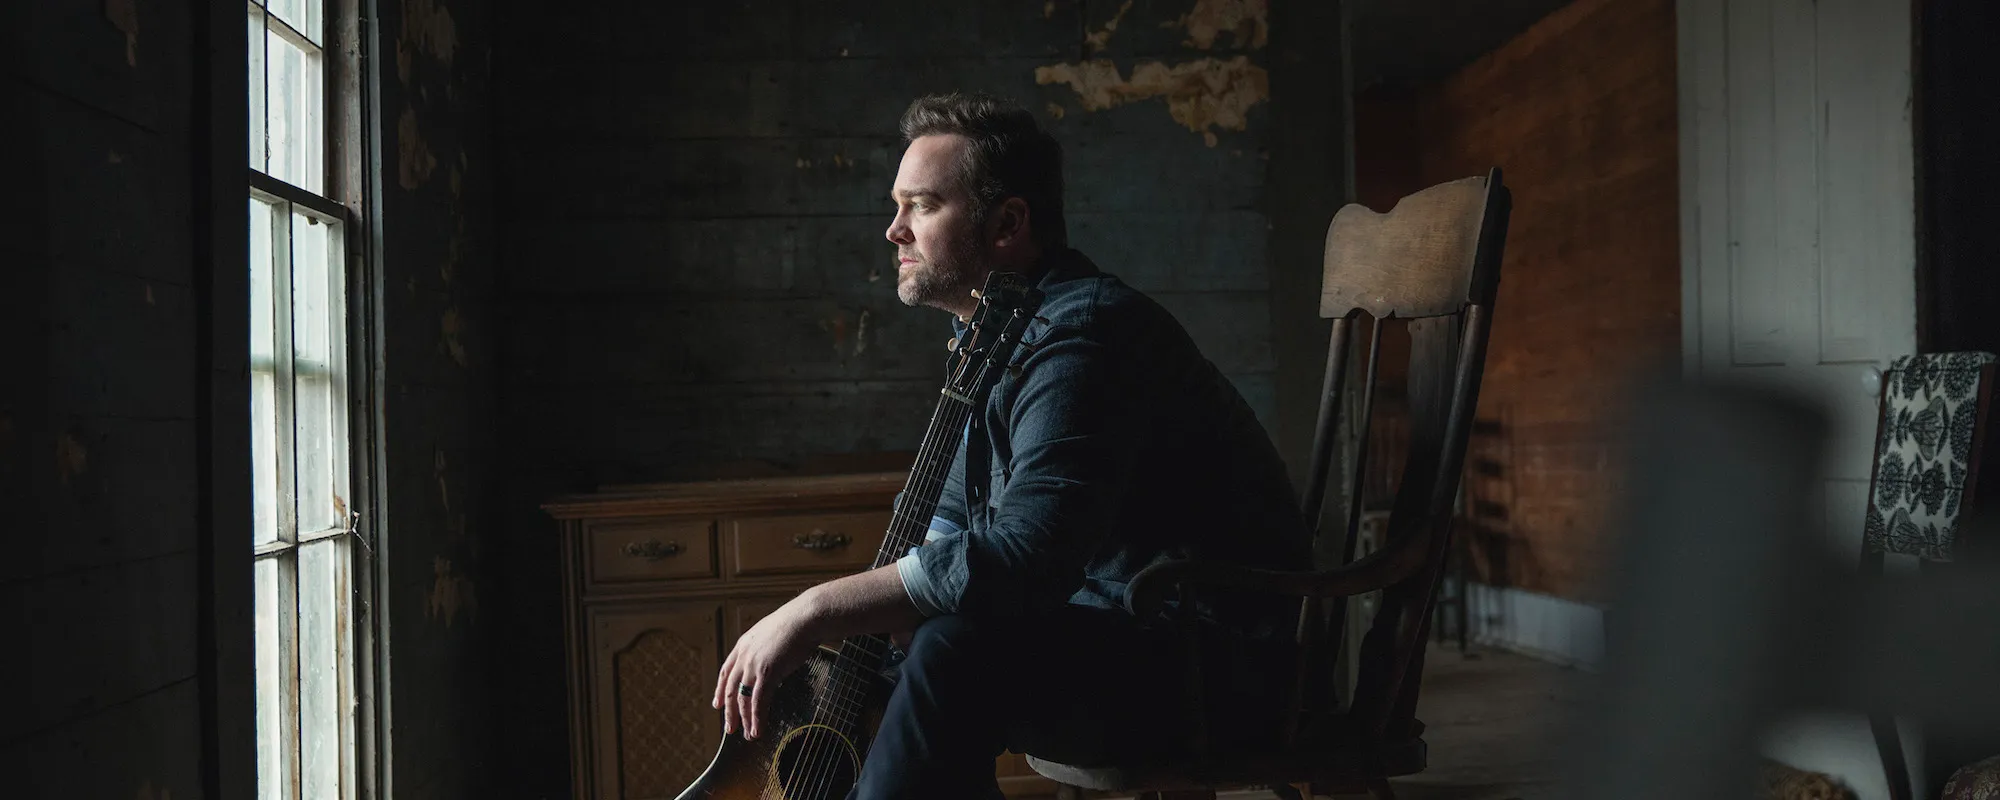 5 Songs You Didn’t Know Lee Brice Wrote for Other Artists